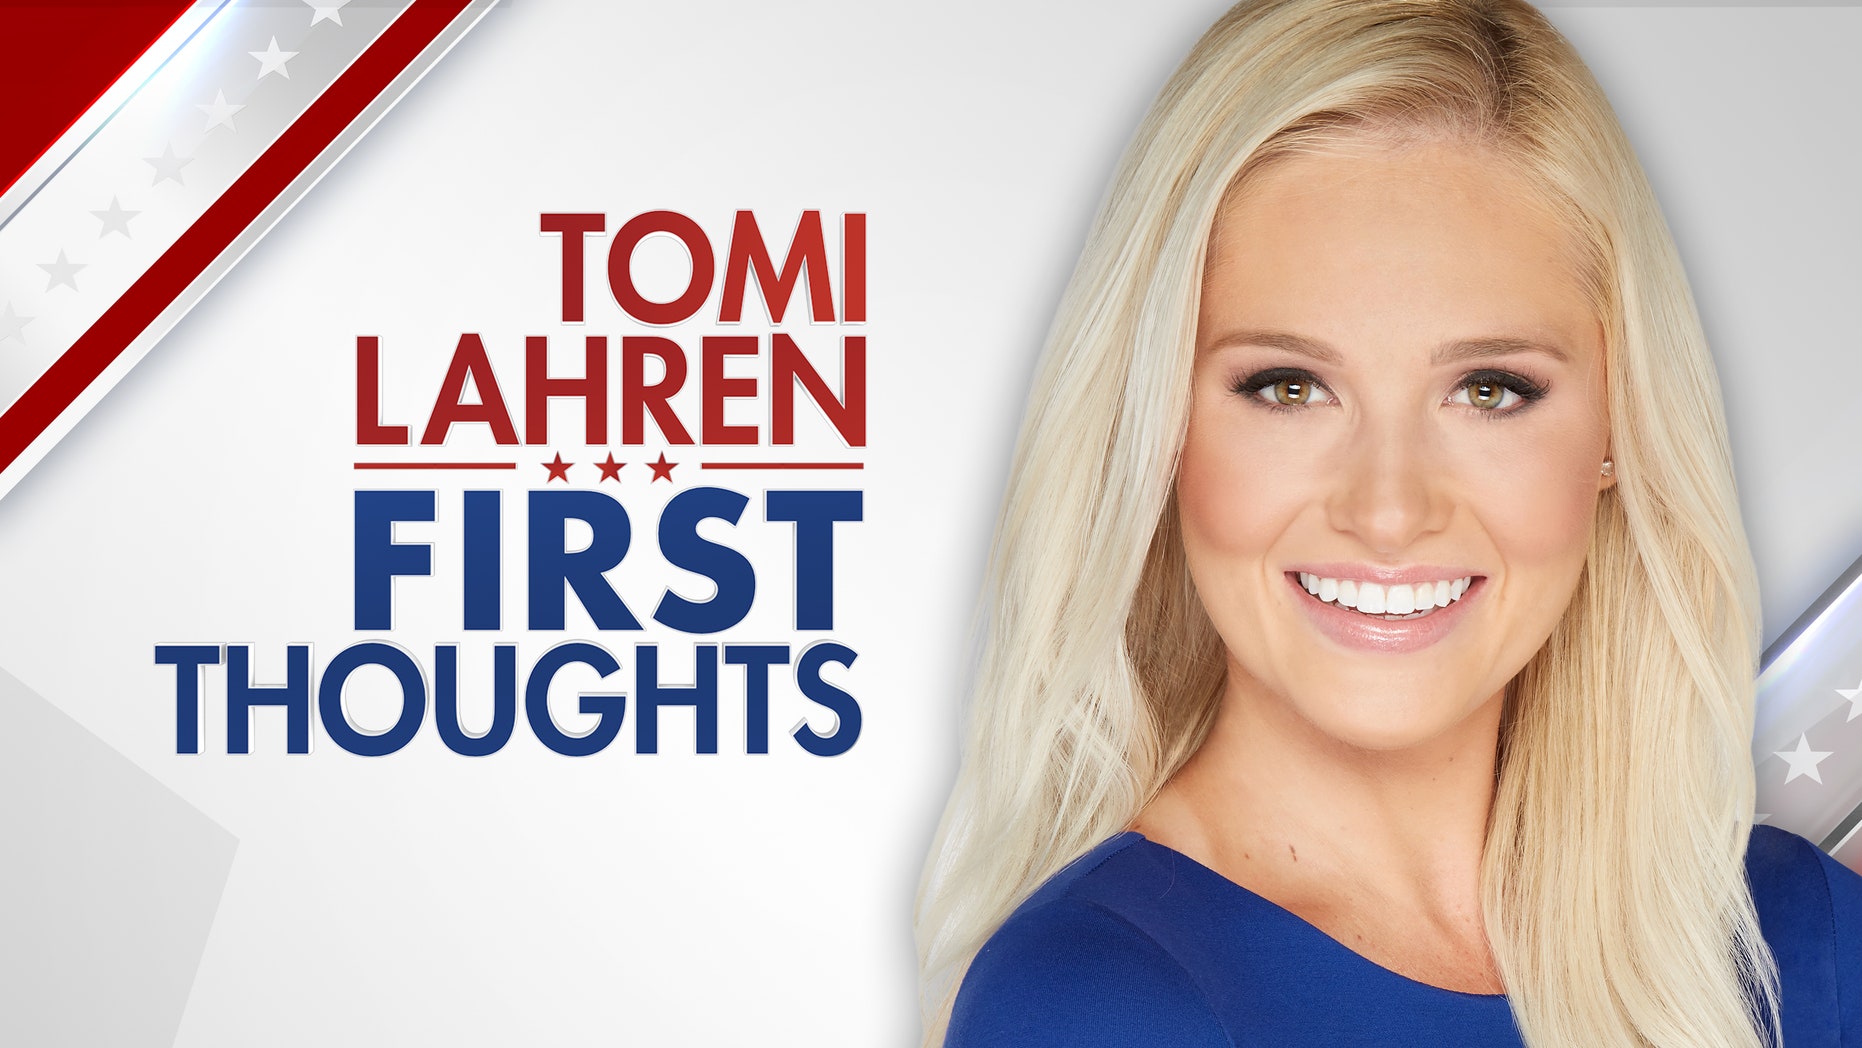 Tomi Lahren: Government shutdown has Dems whining and complaining but in private they